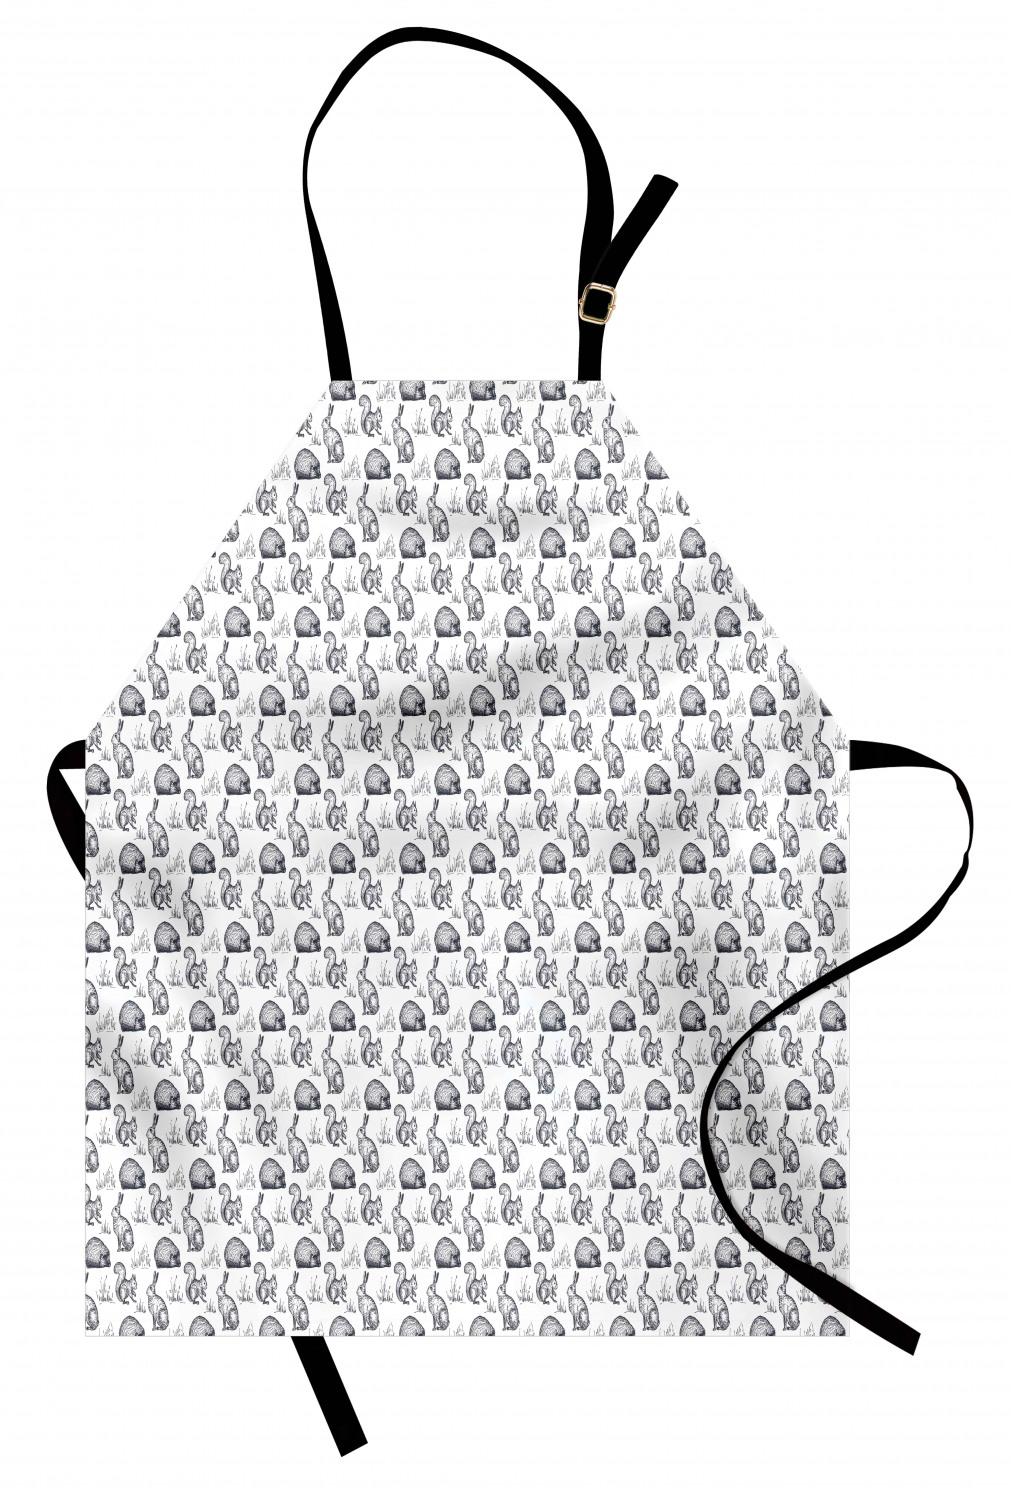 Details about   Ambesonne Indoor Use Apron Bib with Adjustable Neck Strap for GardeningCooking 